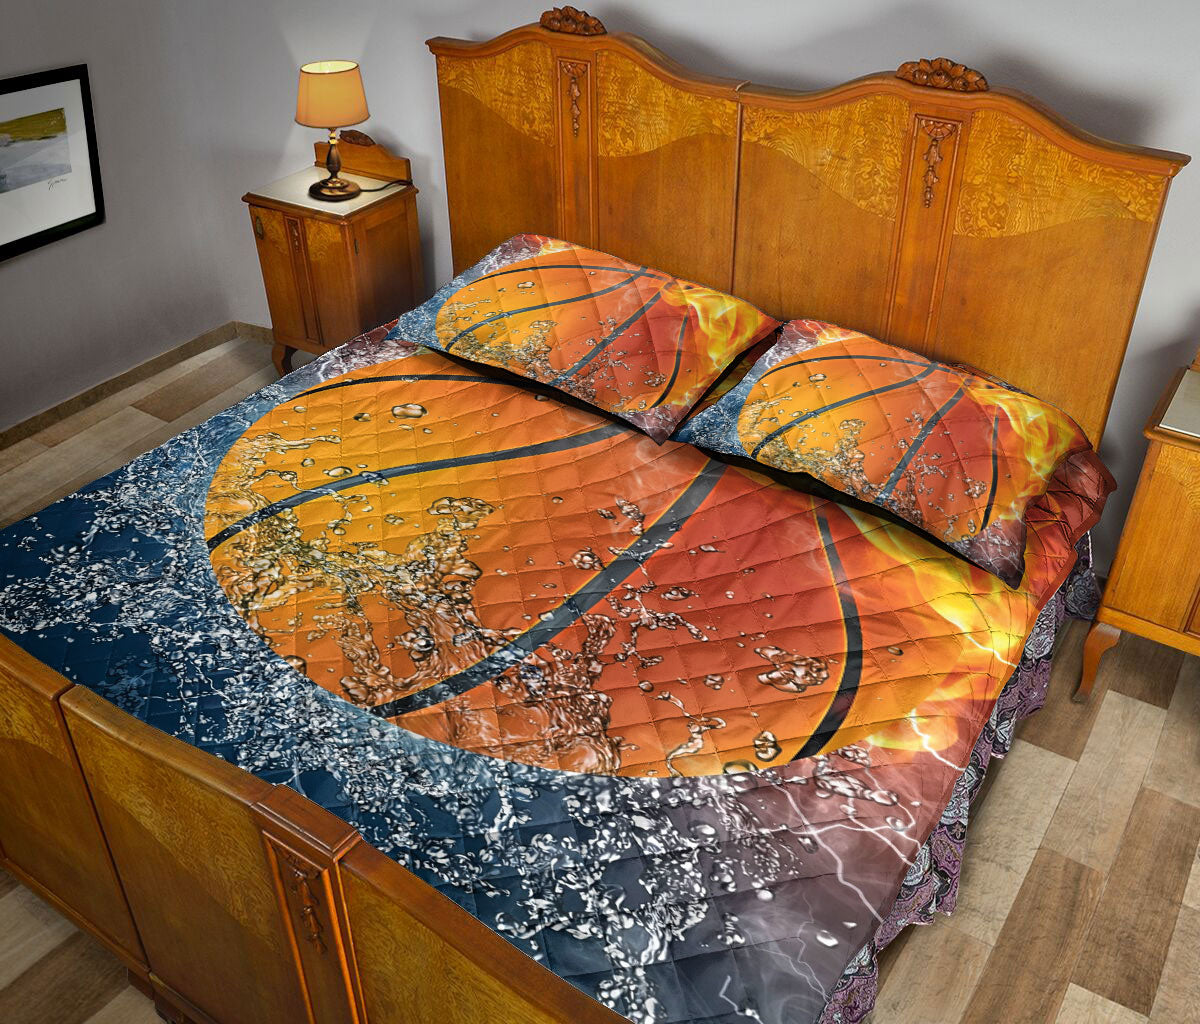 Ohaprints-Quilt-Bed-Set-Pillowcase-Basketball-Ball-Fire-&-Water-Unique-Gift-For-Sports-Lover-Men-Women-Kids-Blanket-Bedspread-Bedding-2014-Queen (80'' x 90'')